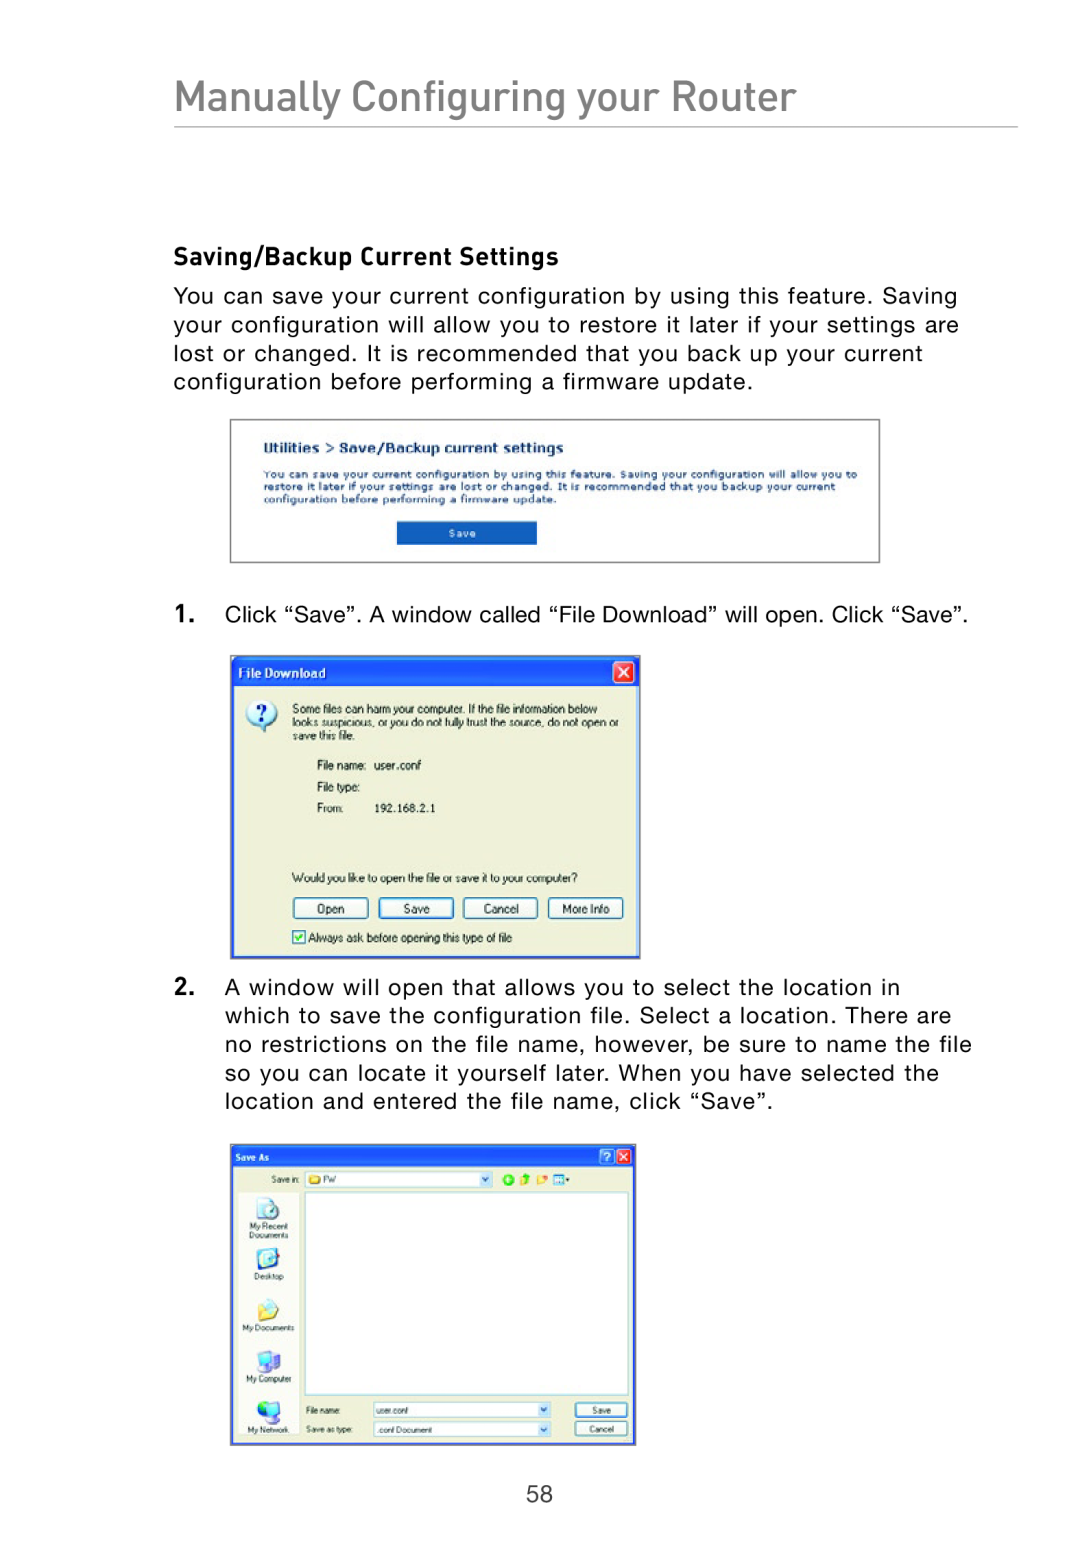 Belkin Pre-N manual Saving/Backup Current Settings, Manually Configuring your Router 